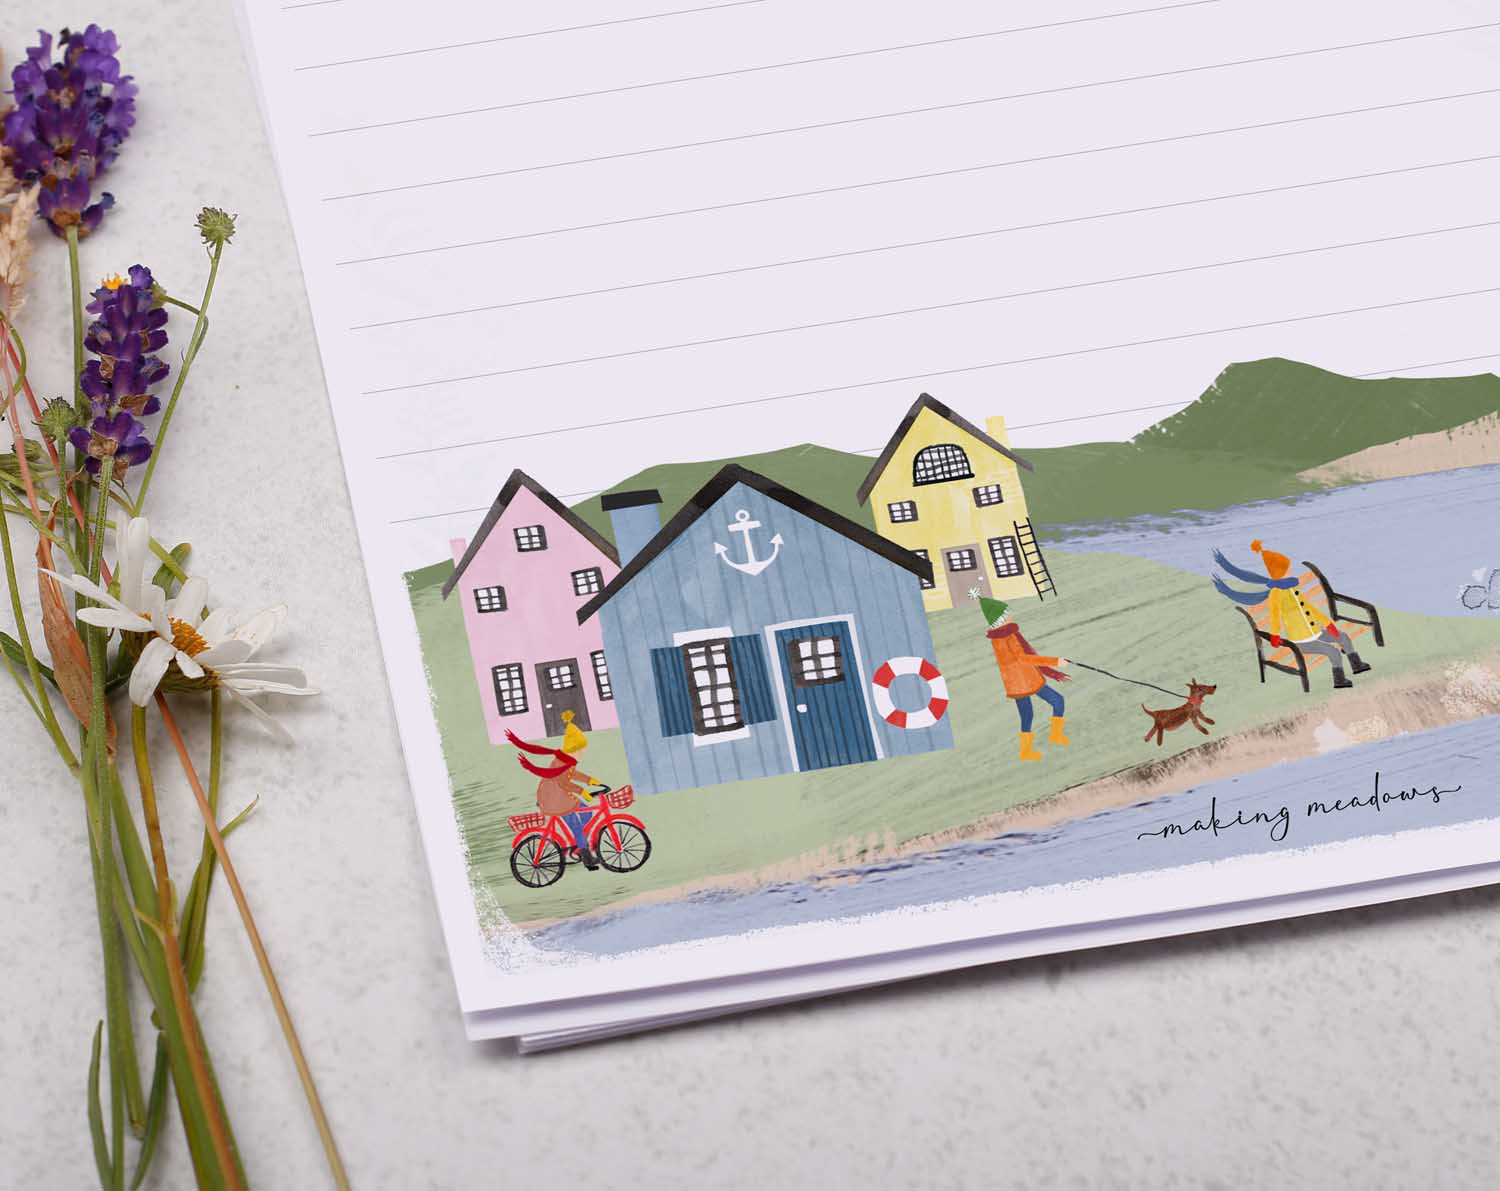 A4 letter writing paper sheets with a cute illustration of an English seaside town surrounded by rolling cliffs.